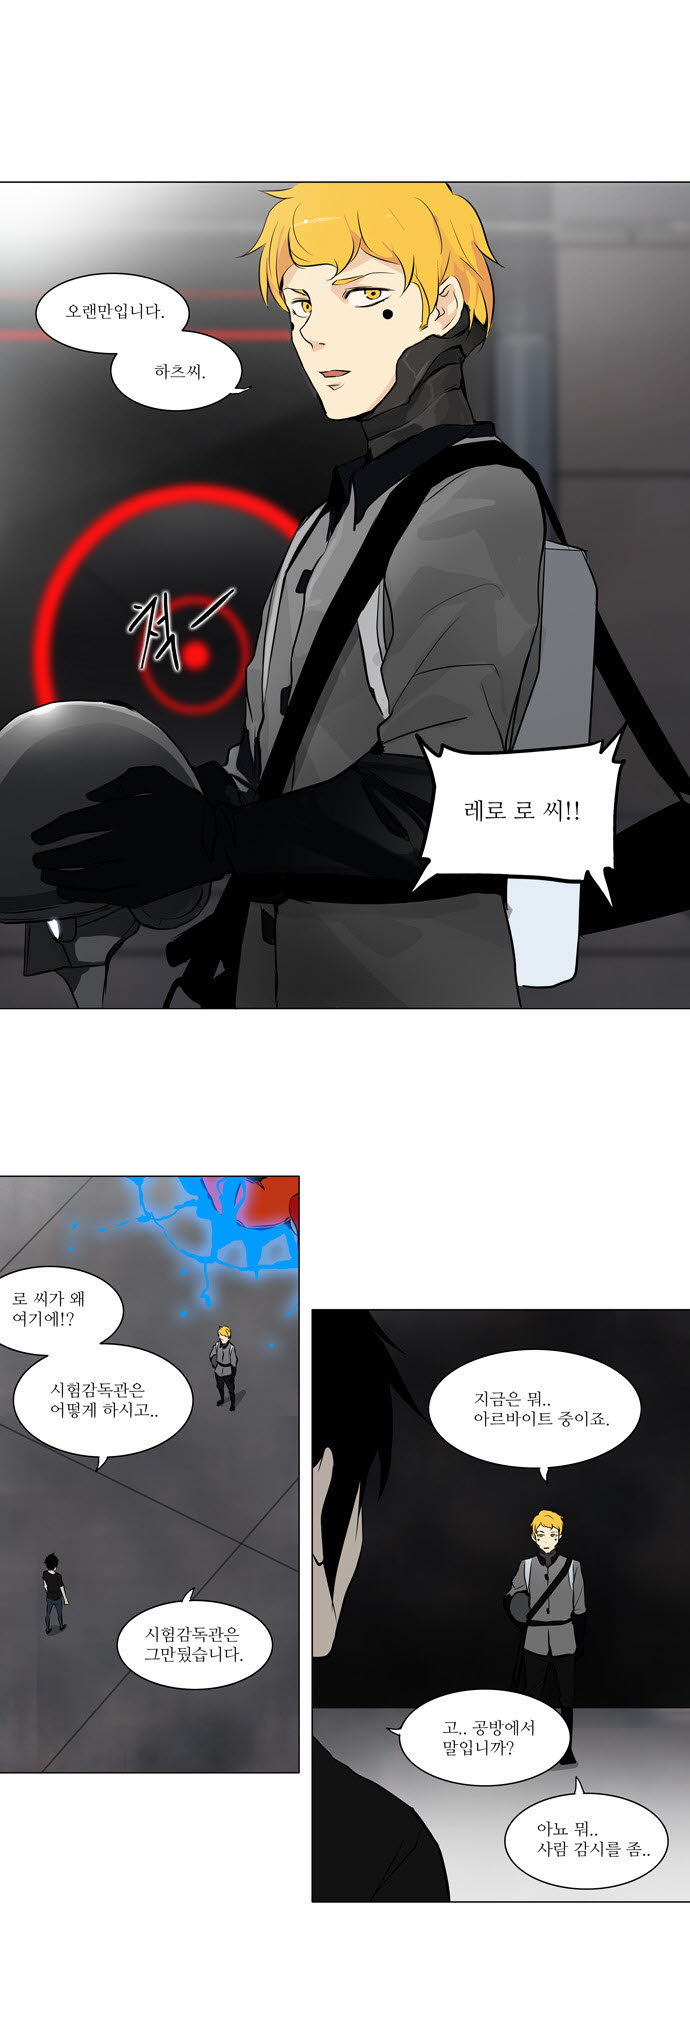 Tower of God - Chapter 159 - Page 1